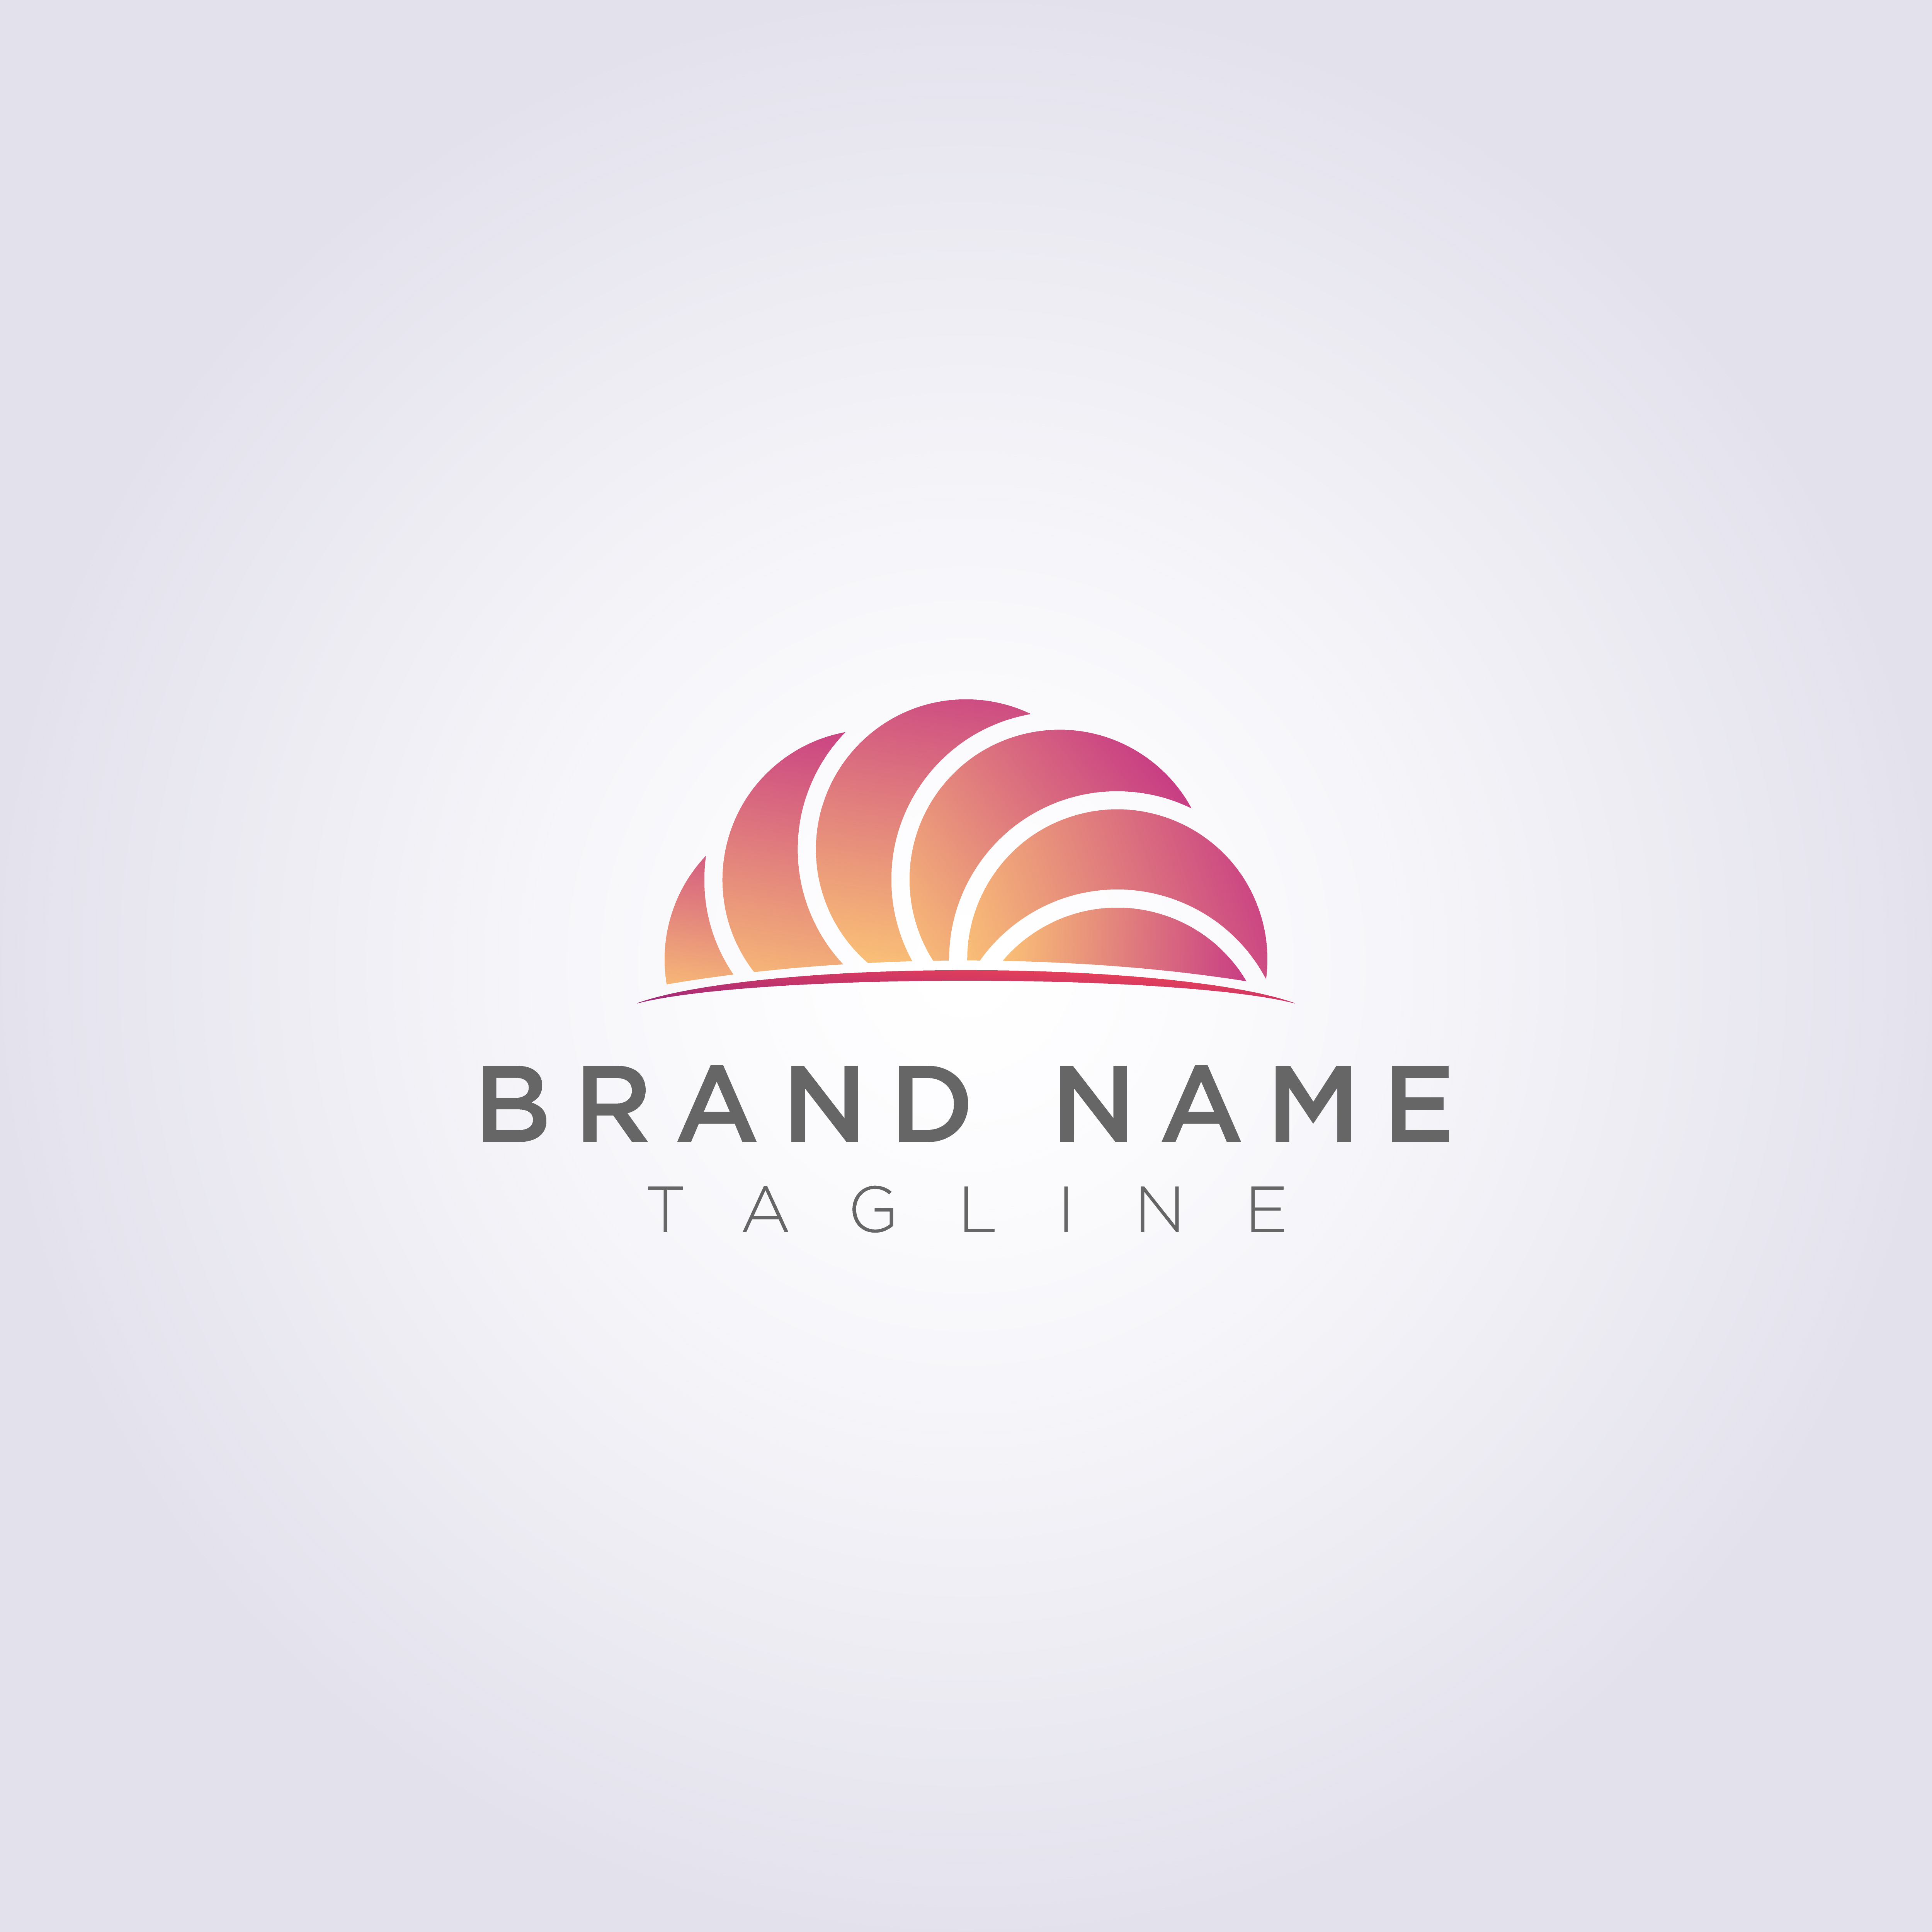 Luxury and elegant Logo Design for your Business or Brand 580855 Vector ...